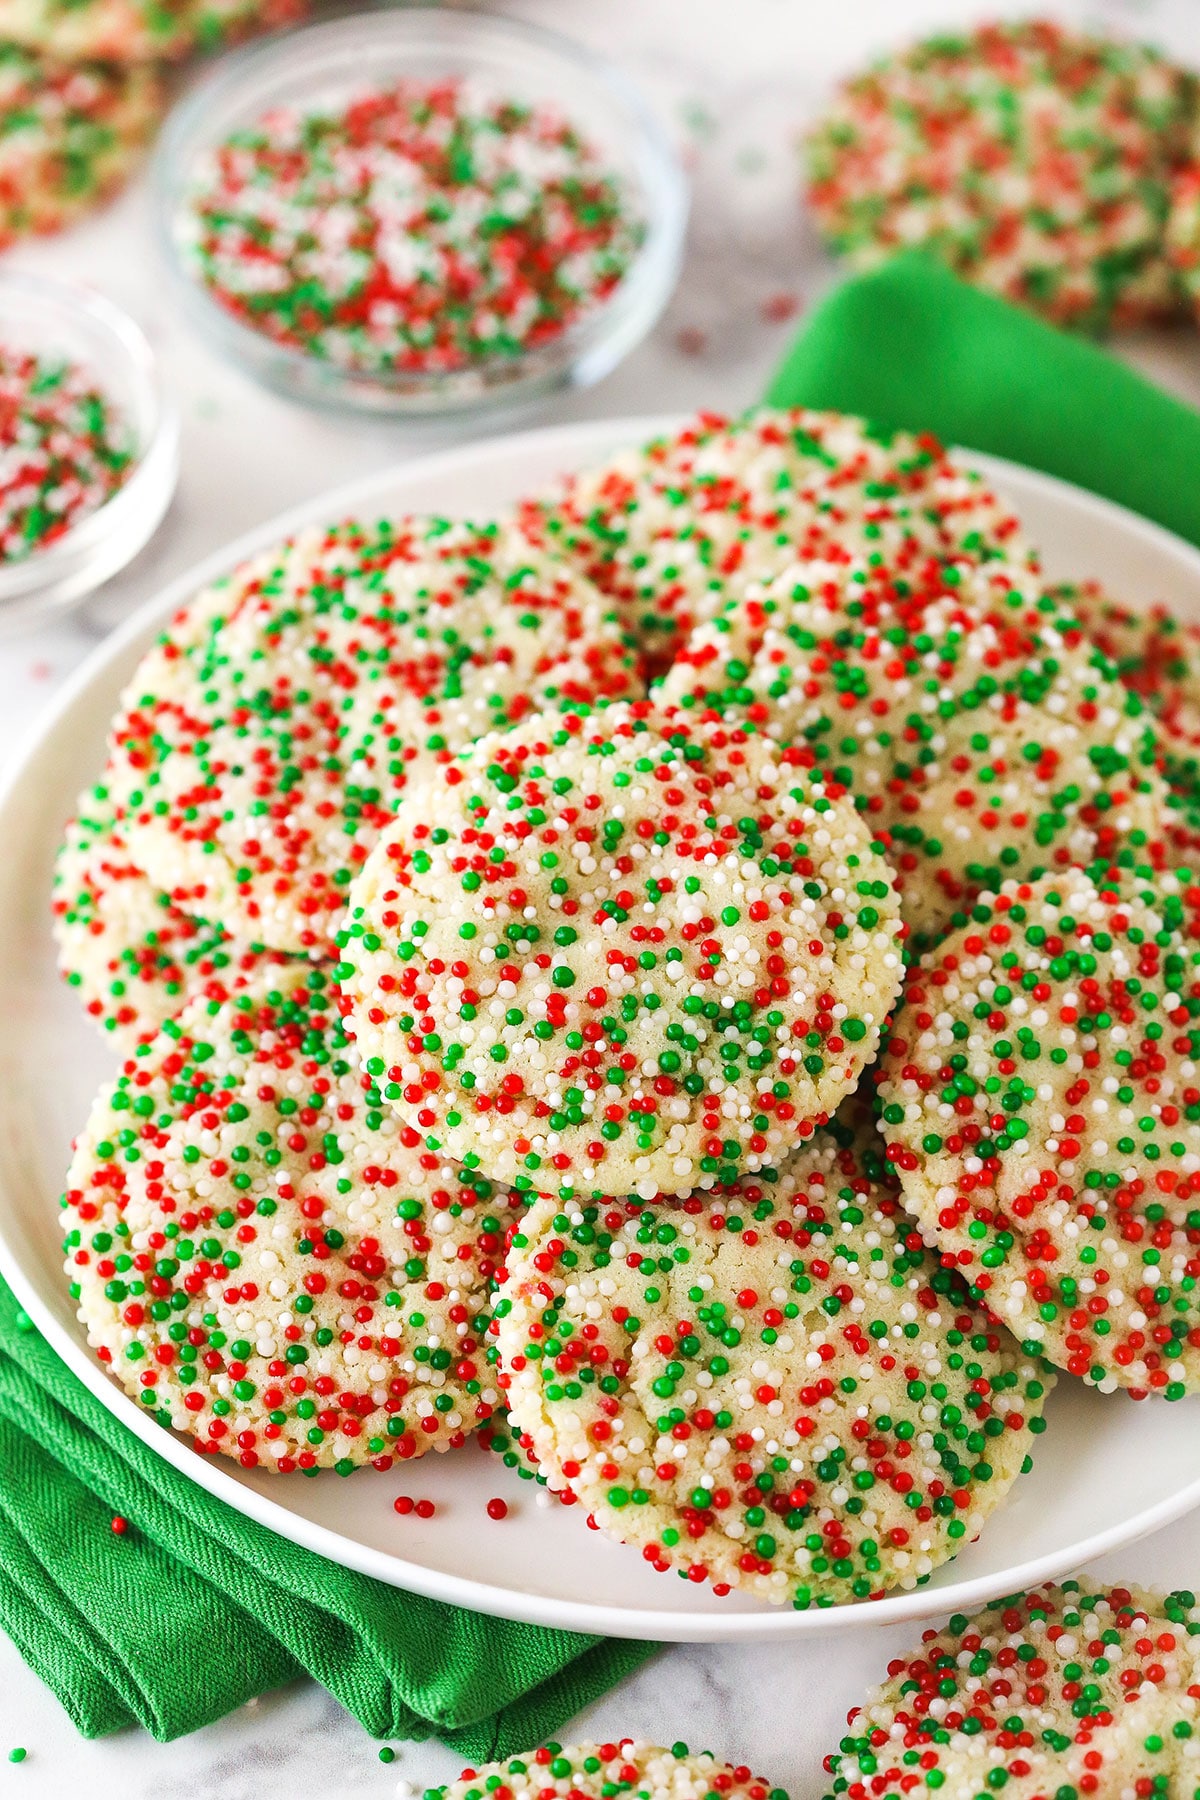 A plate of Christmas sugar cookies on top of a green kitchen towel with a bowl of sprinkles behind it